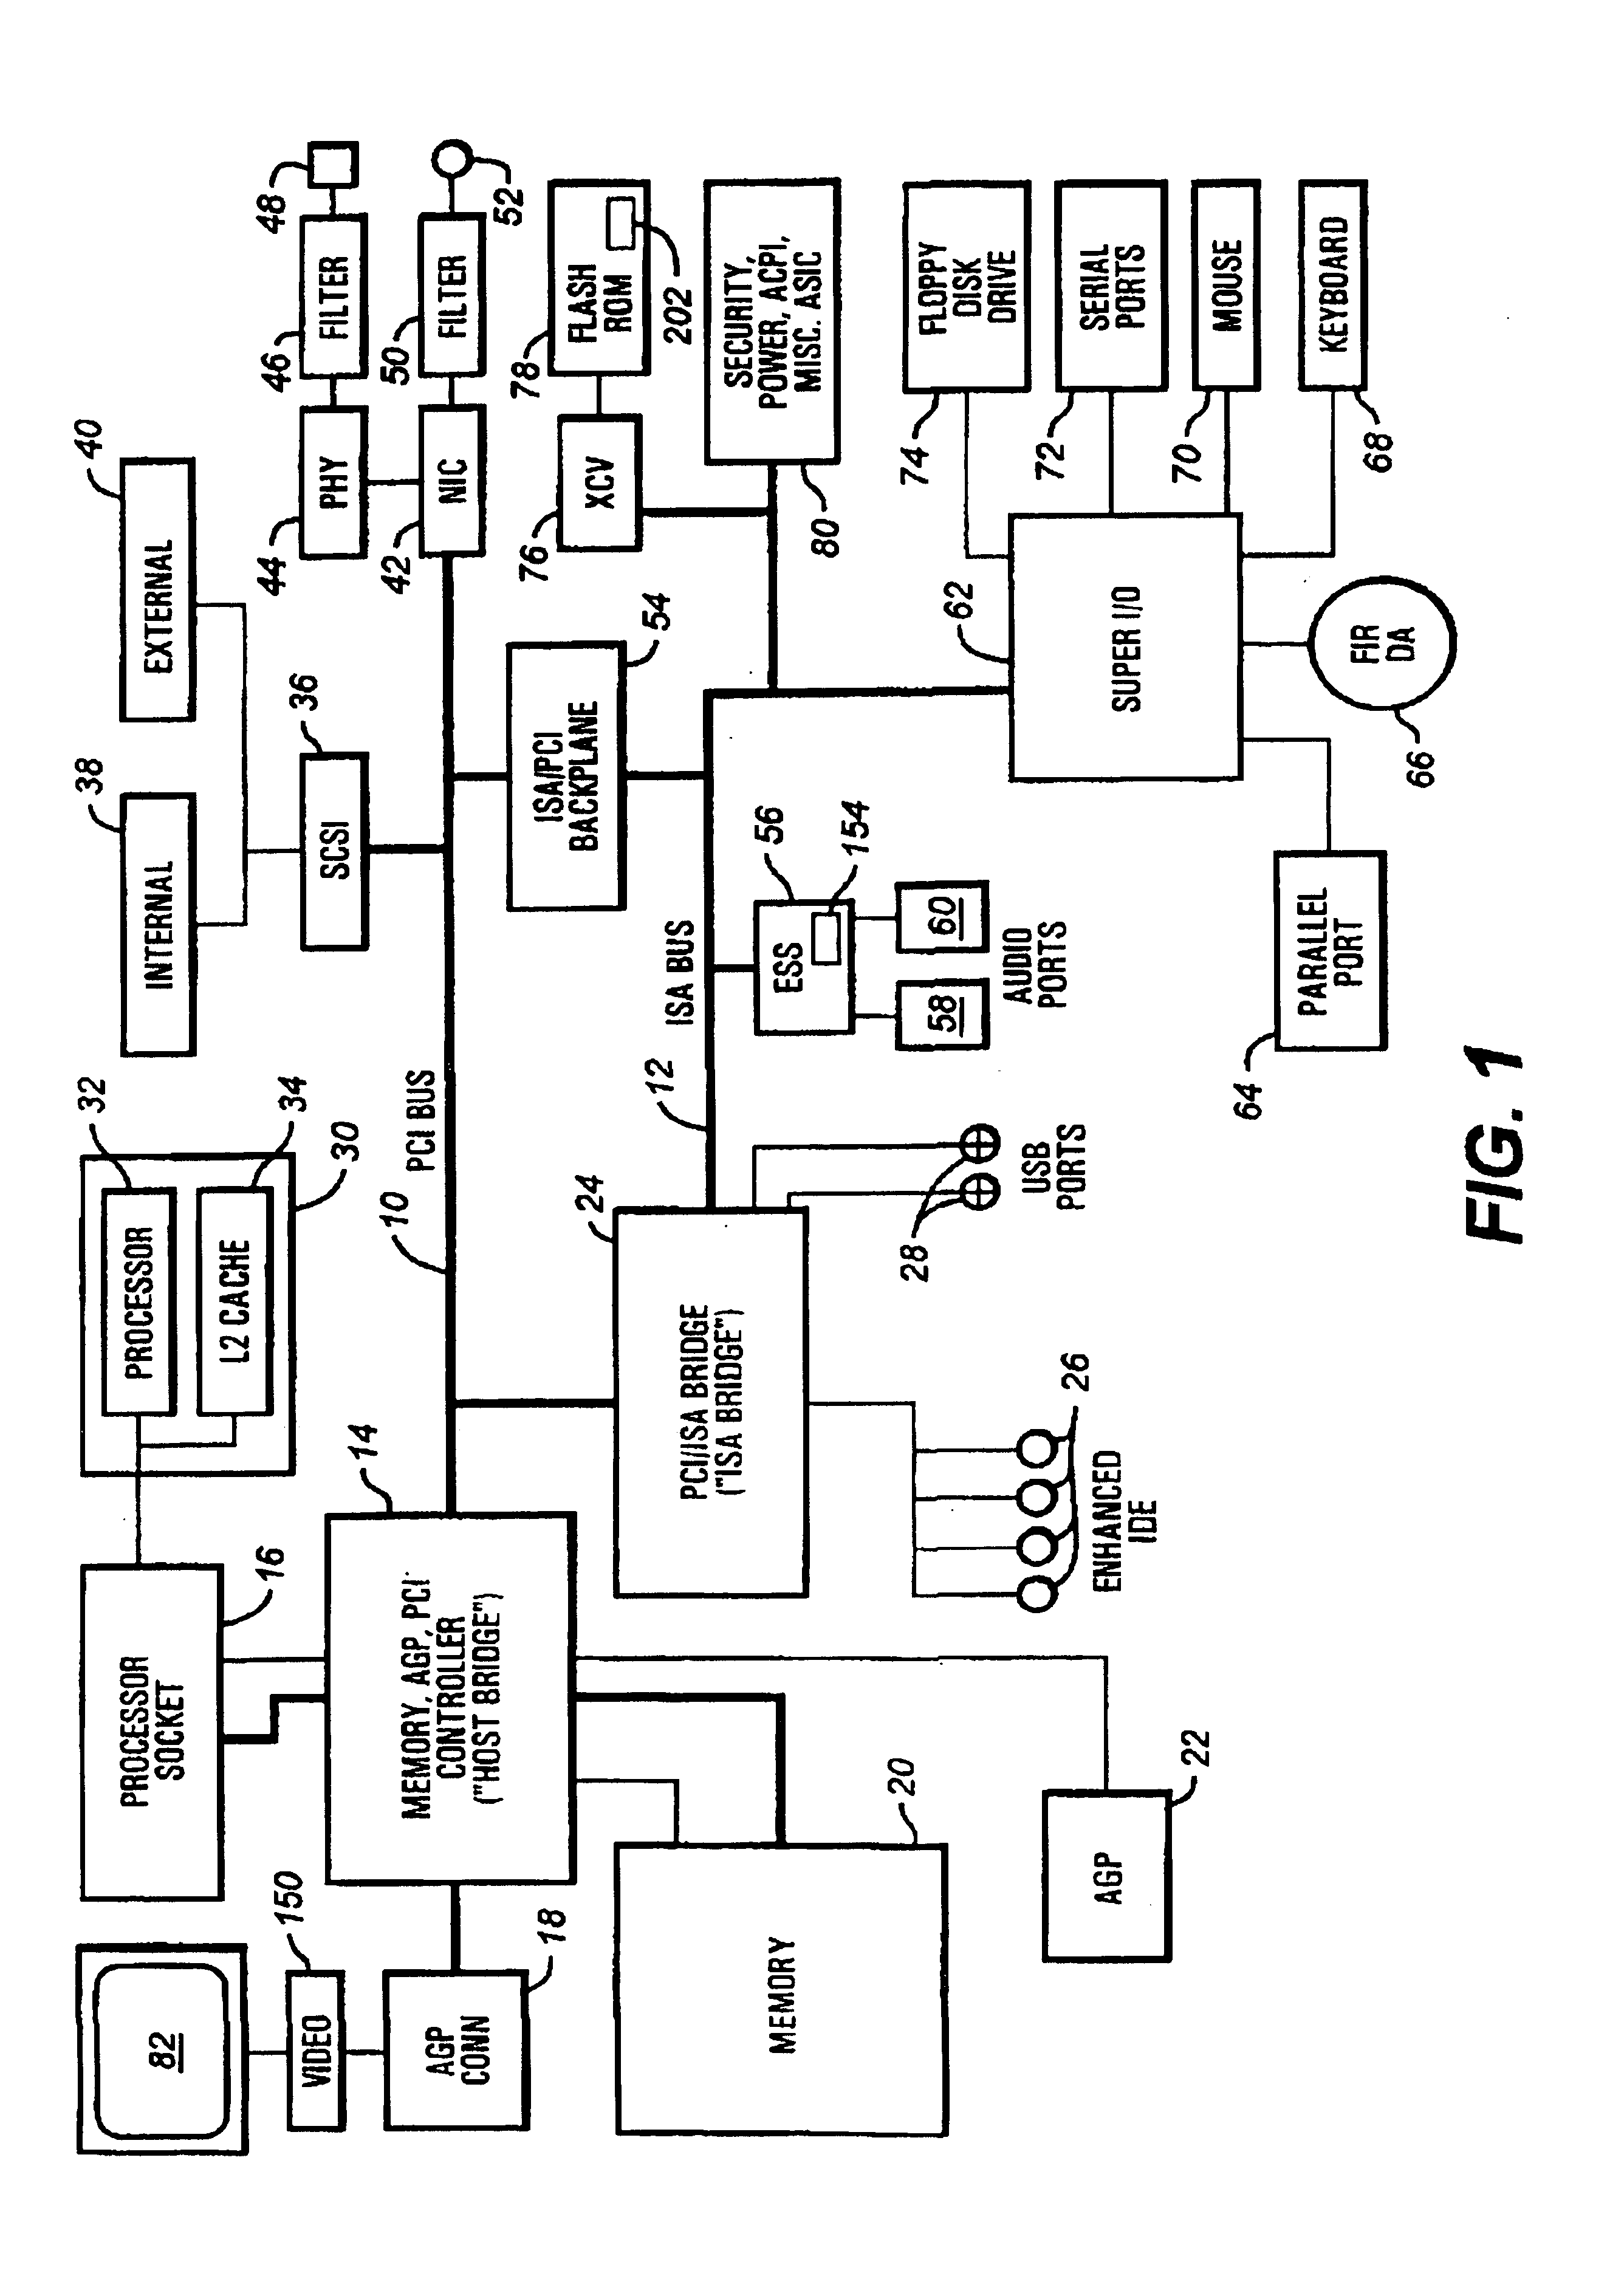 Computer system with post screen format configurability